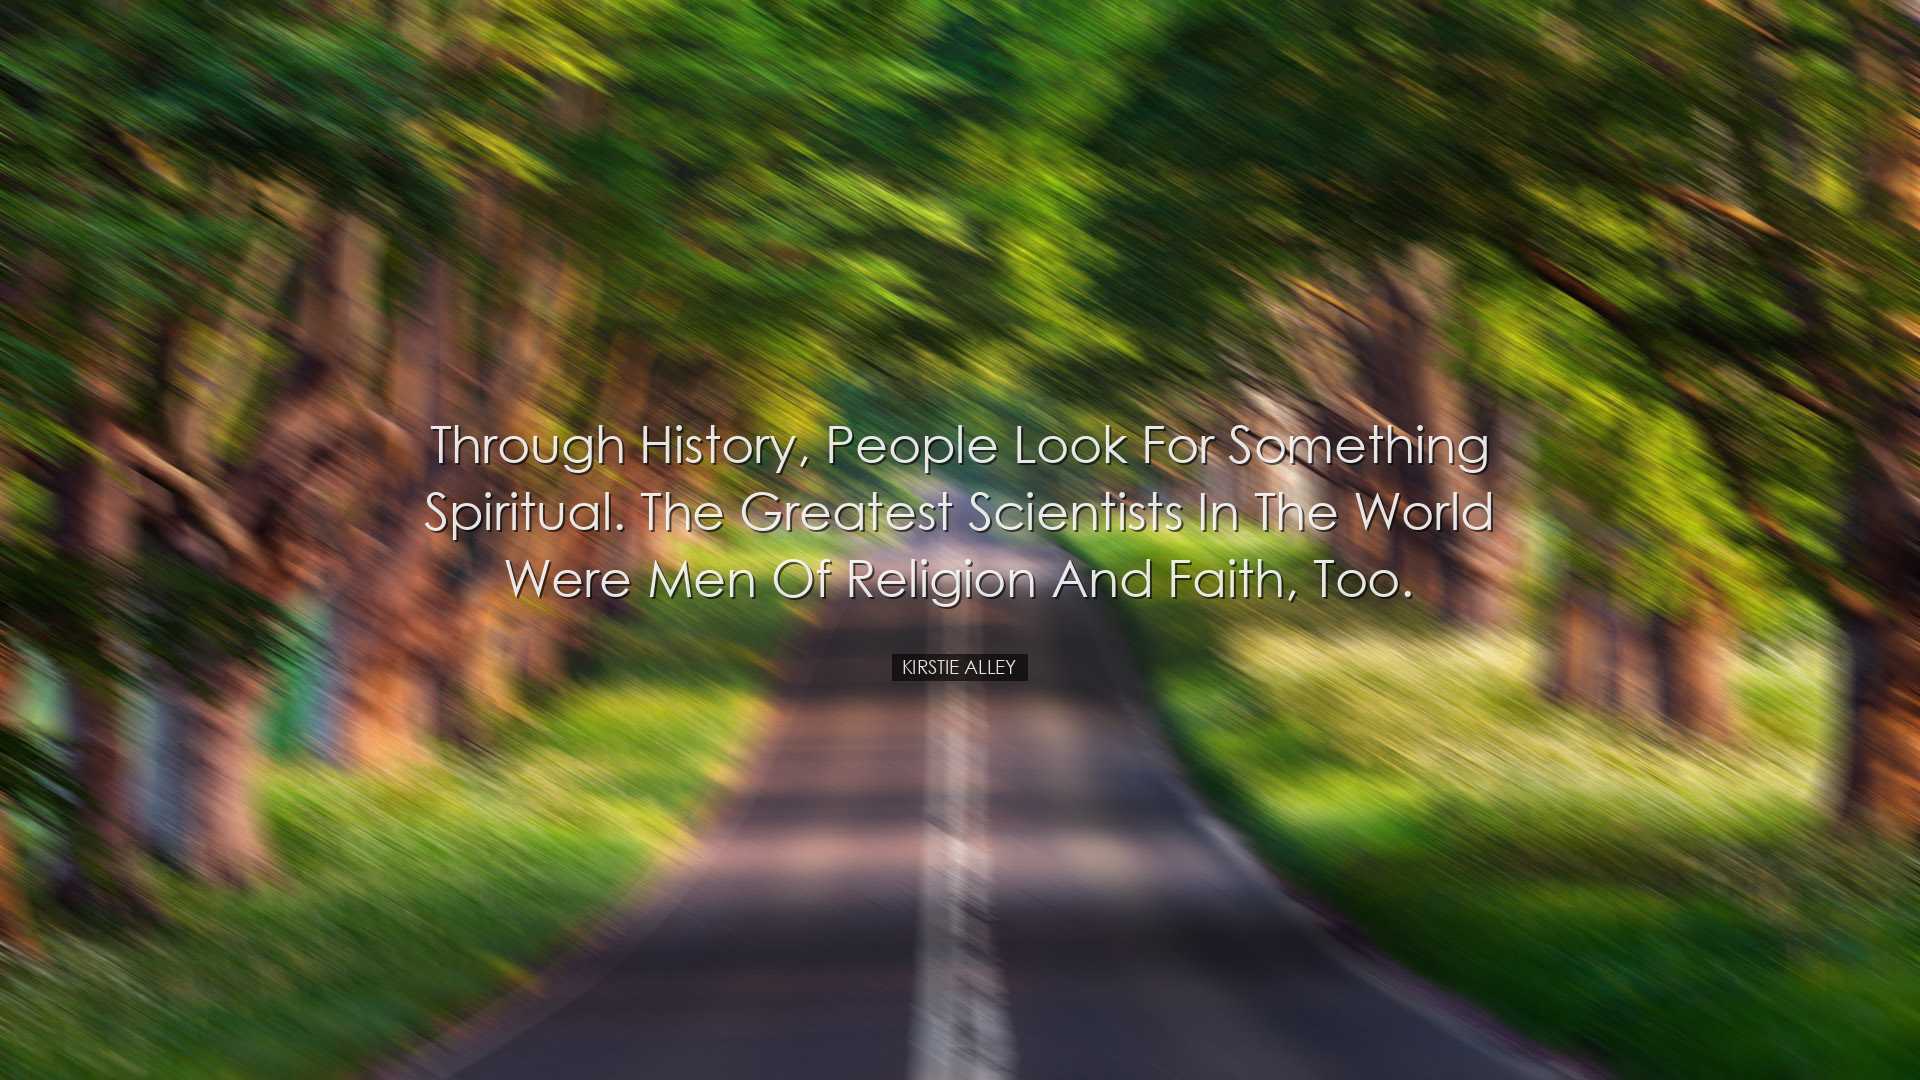 Through history, people look for something spiritual. The greatest